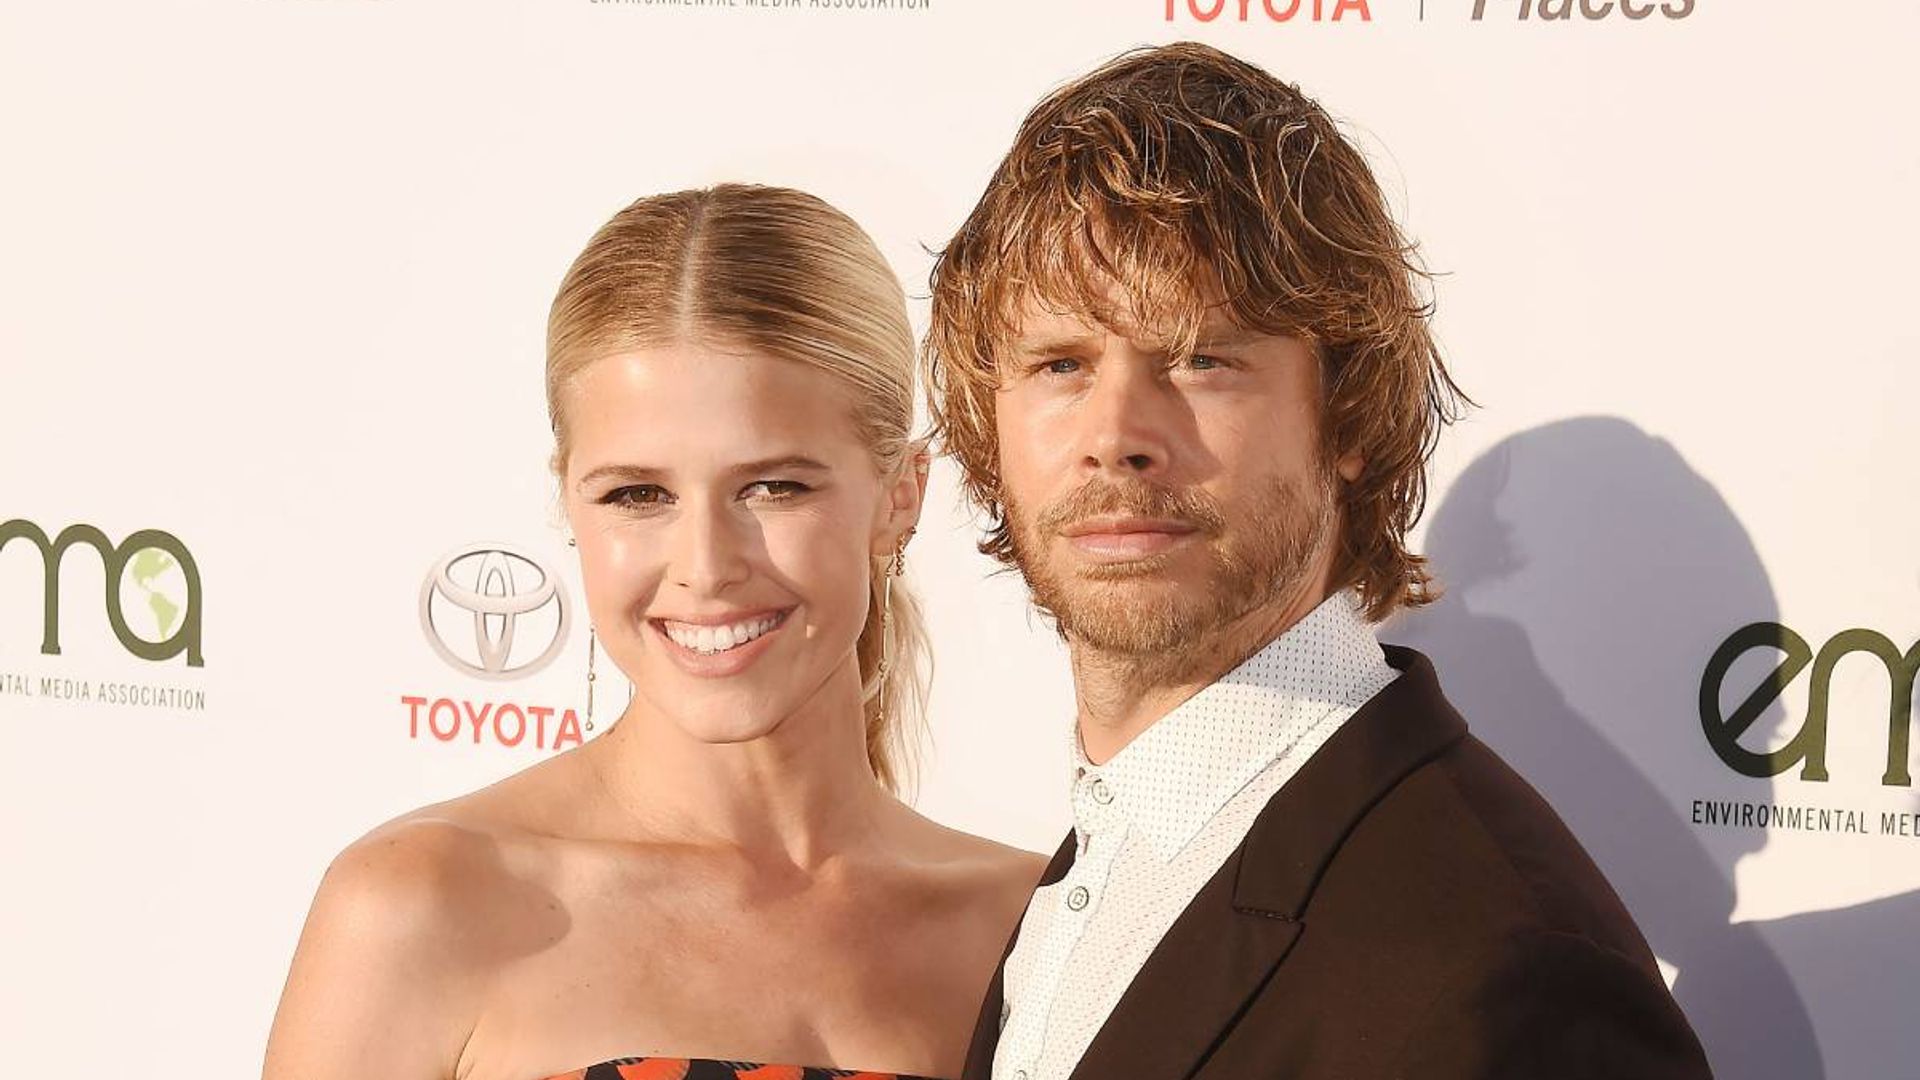 Who is NCIS star Eric Christian Olsen's famous wife? All we know